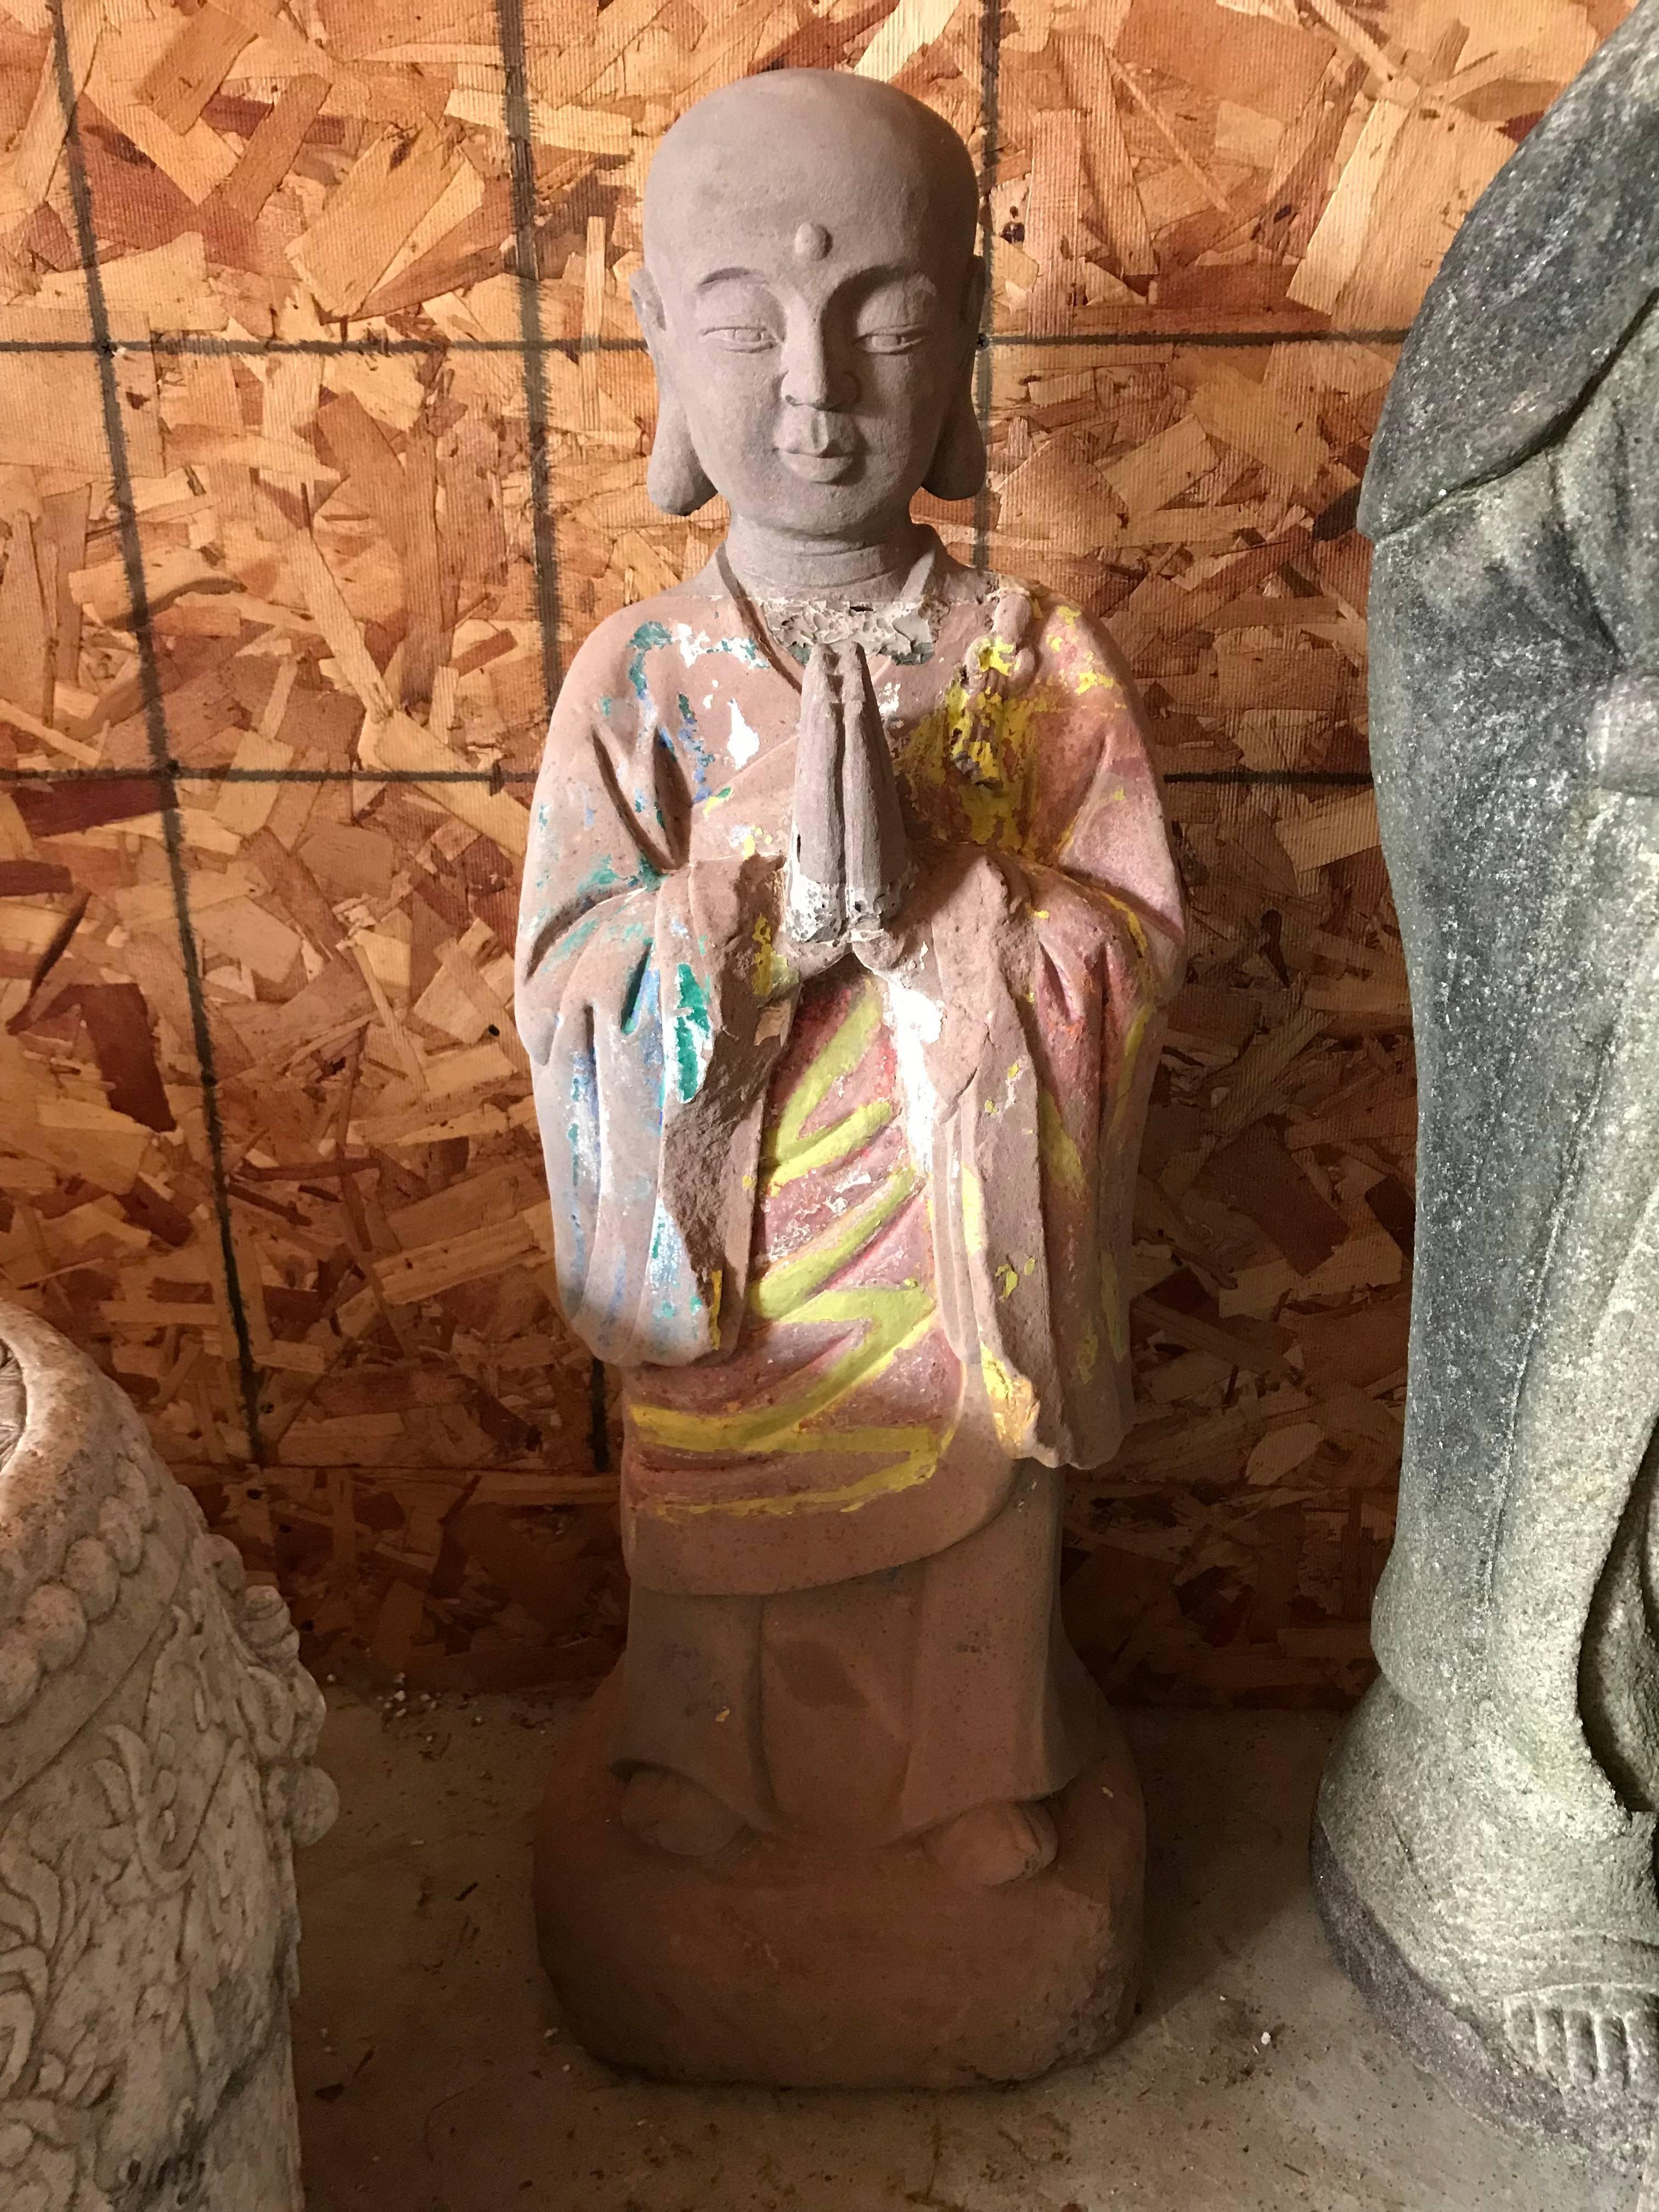 China, an authentic antique hand-carved and hand-painted limestone temple figure of the venerable lohan, Kasyapa.

This beautiful Buddhist sculpture will bring serenity and timeless style to your home, office, sacred space, or garden

Substantial